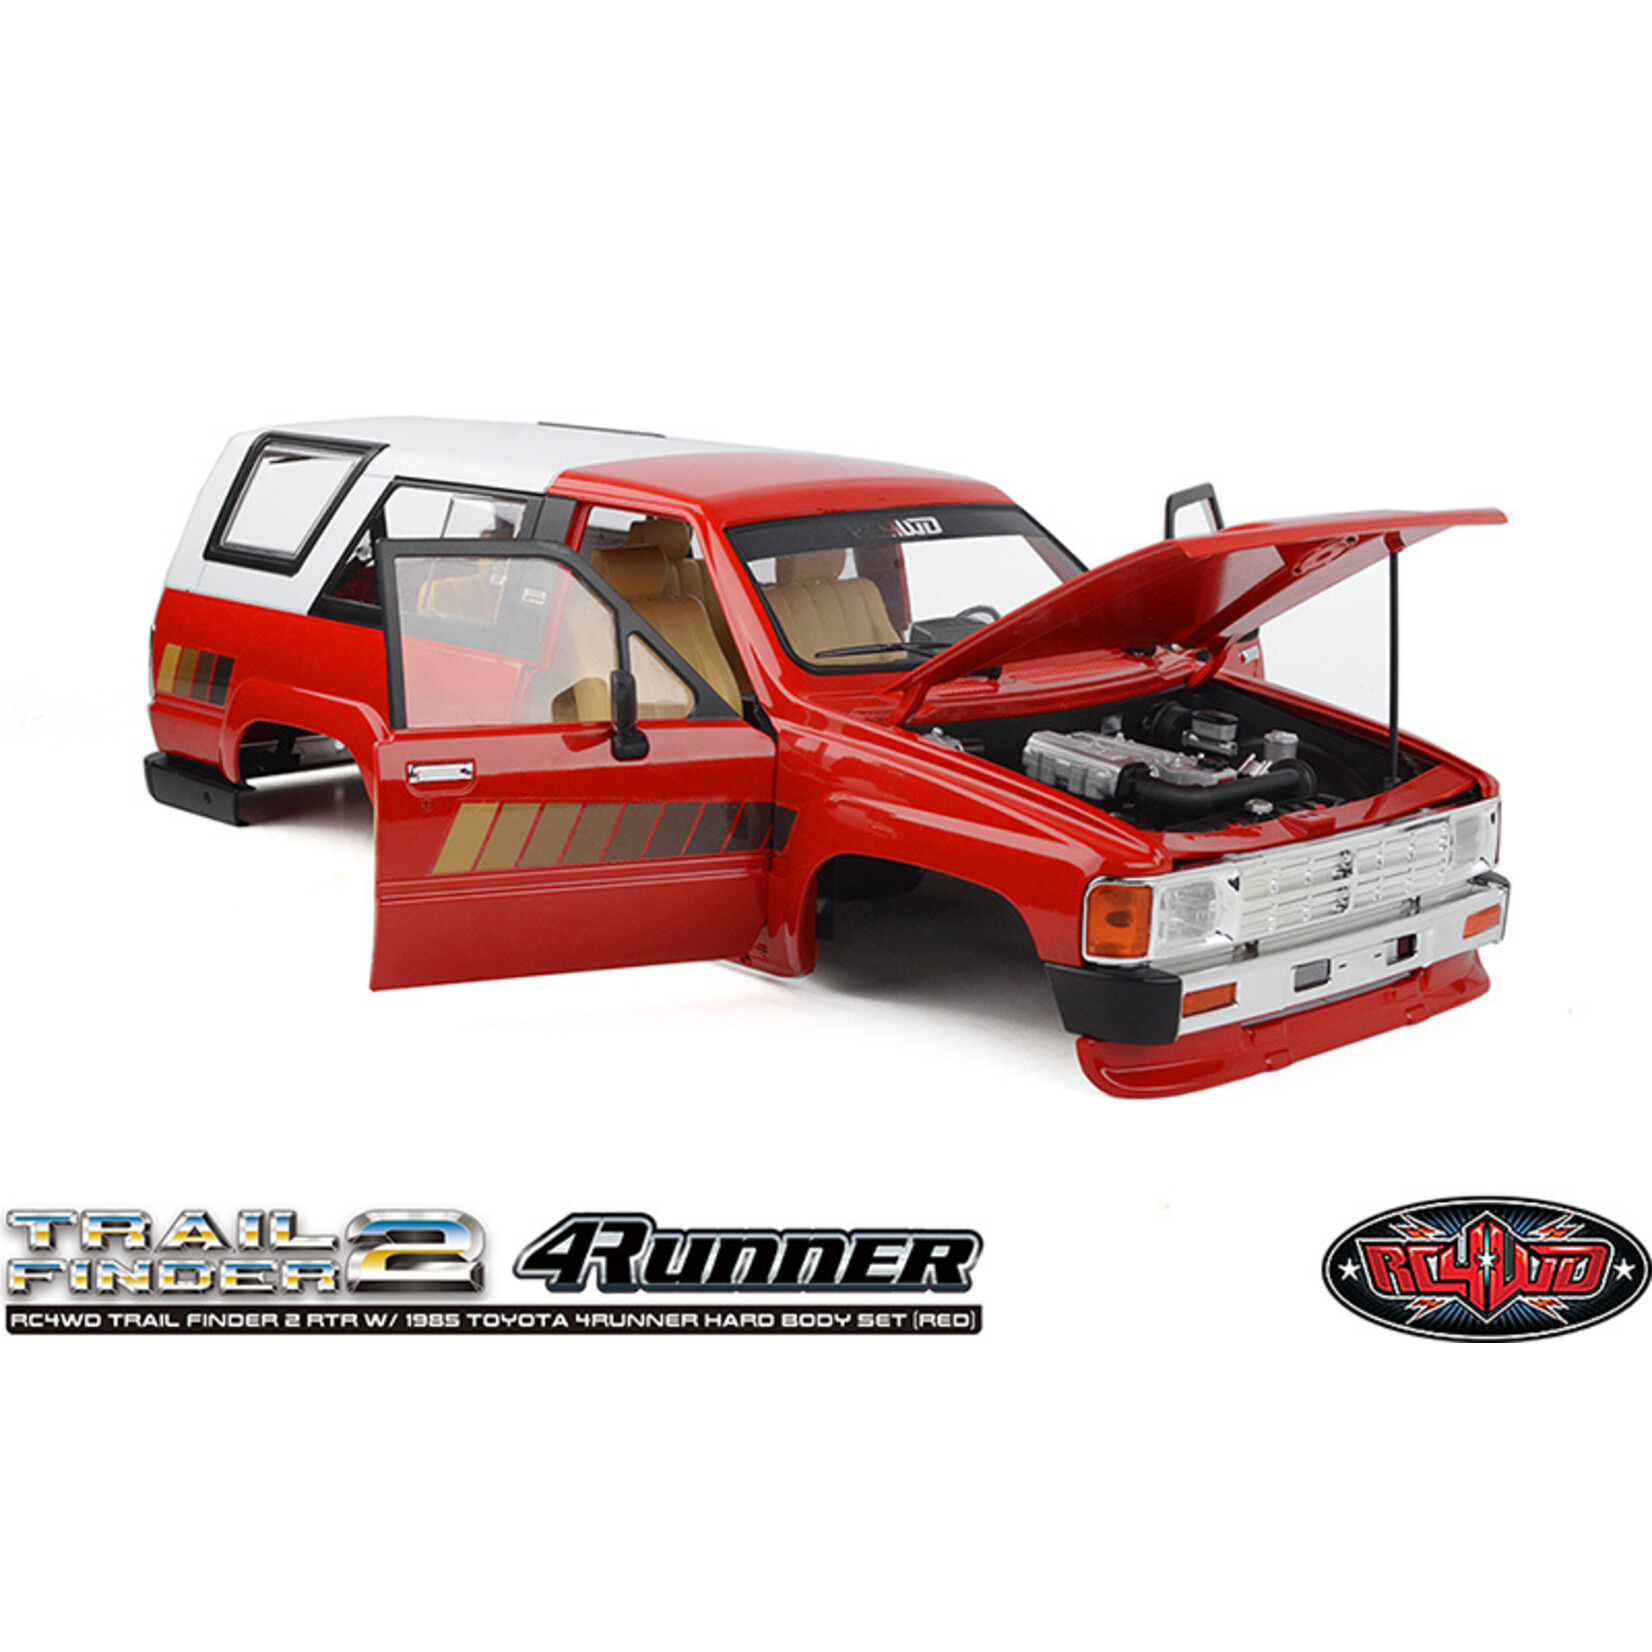 RC4WD RC4WD Trail Finder 2 RTR w/1985 Toyota 4Runner Hard Body Set (Red) #Z-RTR0063